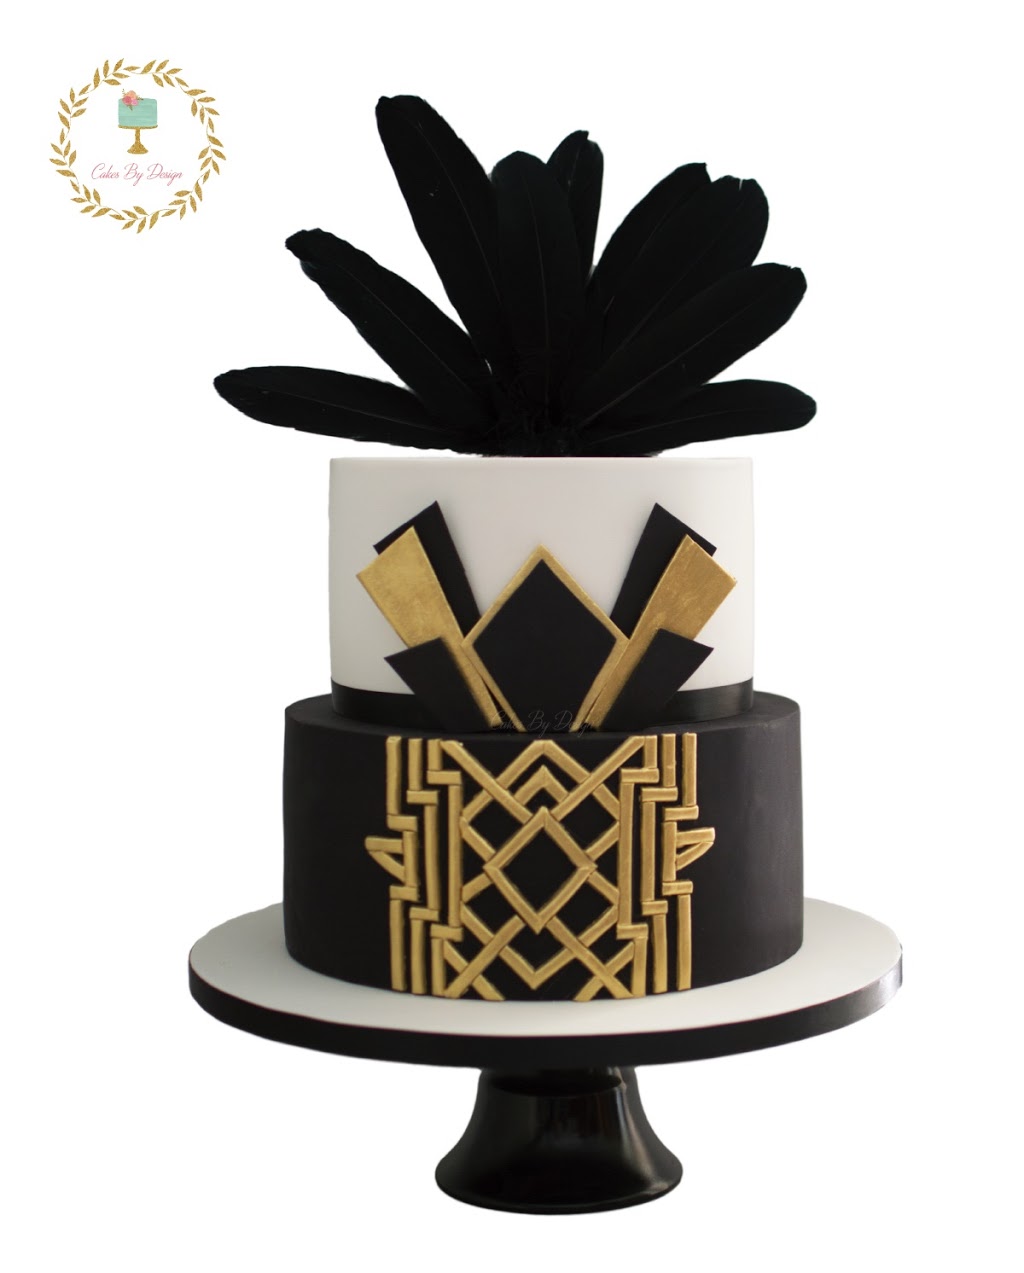 Cakes by Design | By Appointment Only, Ipswich QLD 4304, Australia | Phone: 0430 500 947